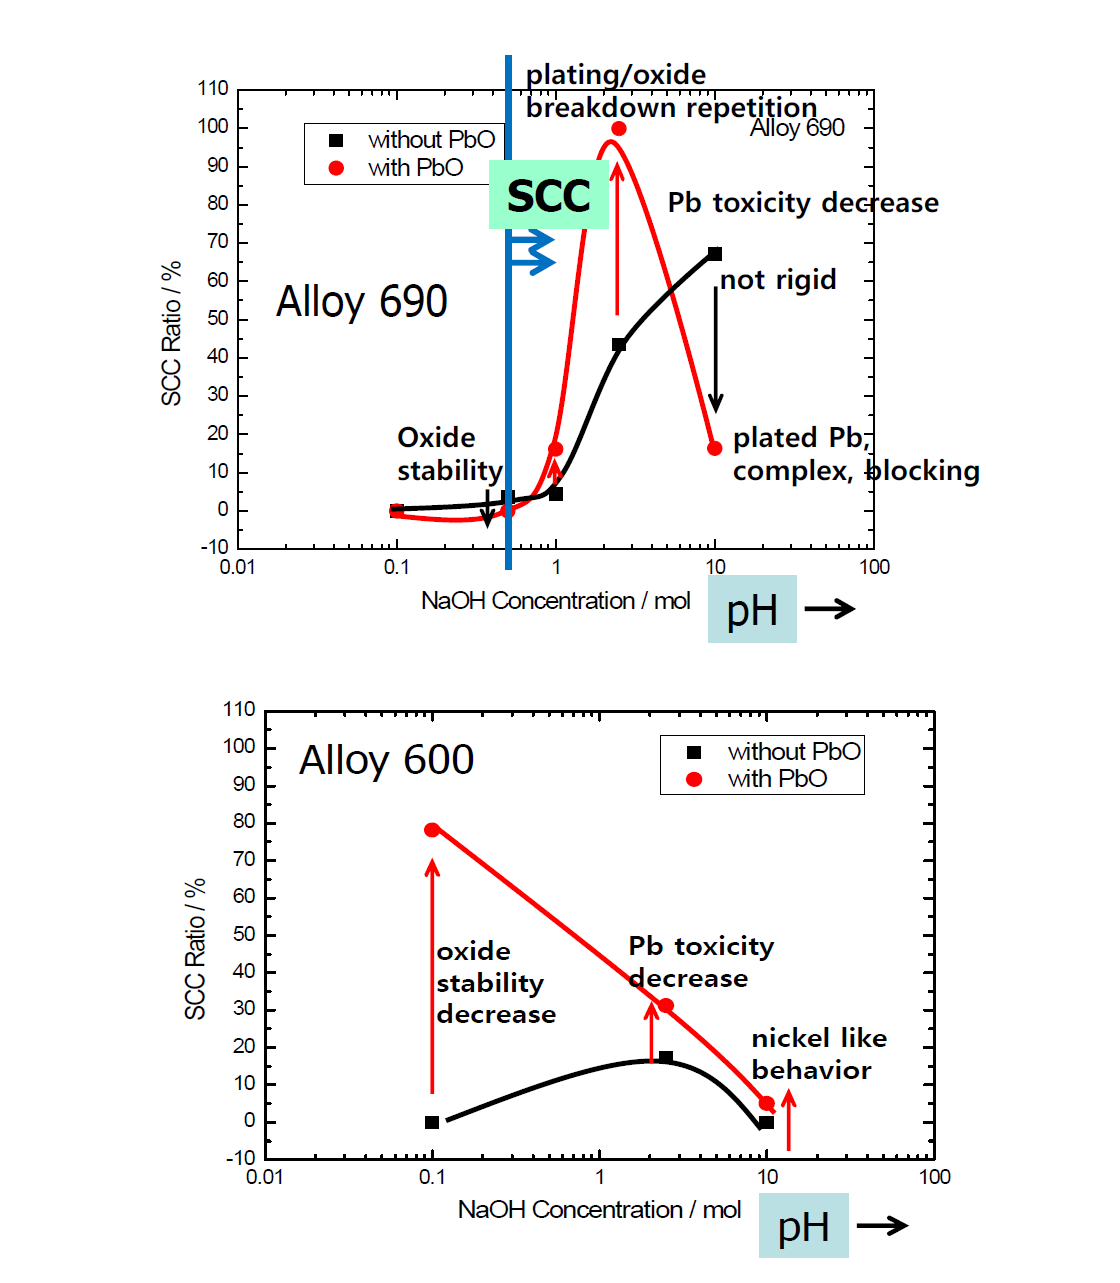 SCC ratio vs. NaOH concentration for Alloy 690 and Alloy 600 obtained from SSRT.